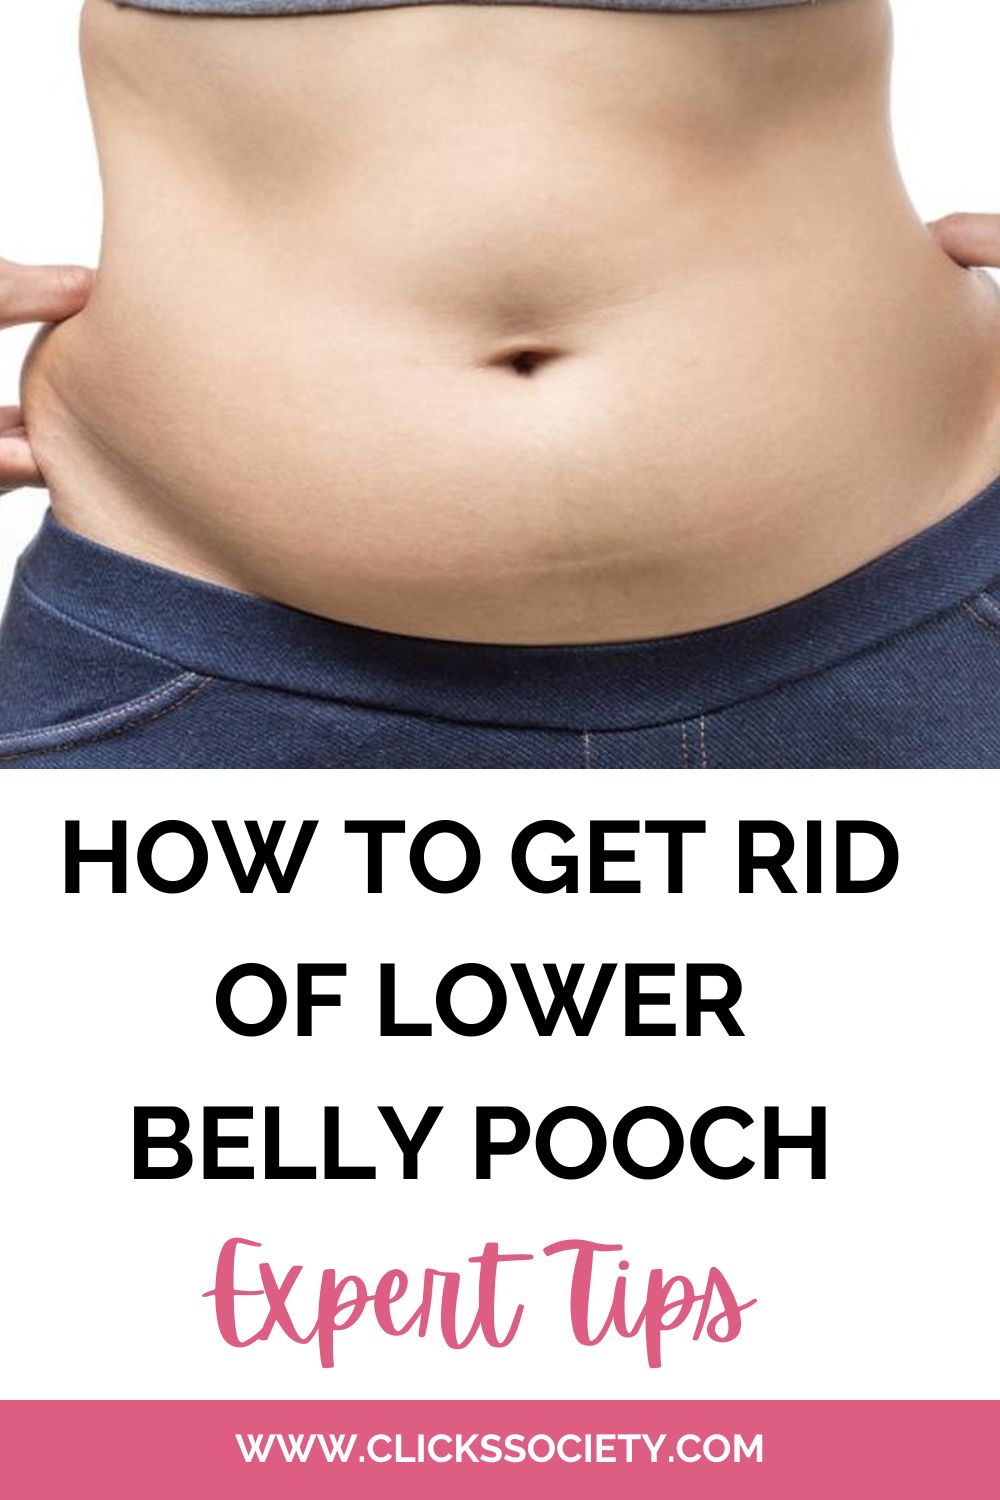 How to Get Rid of Lower Belly Pooch